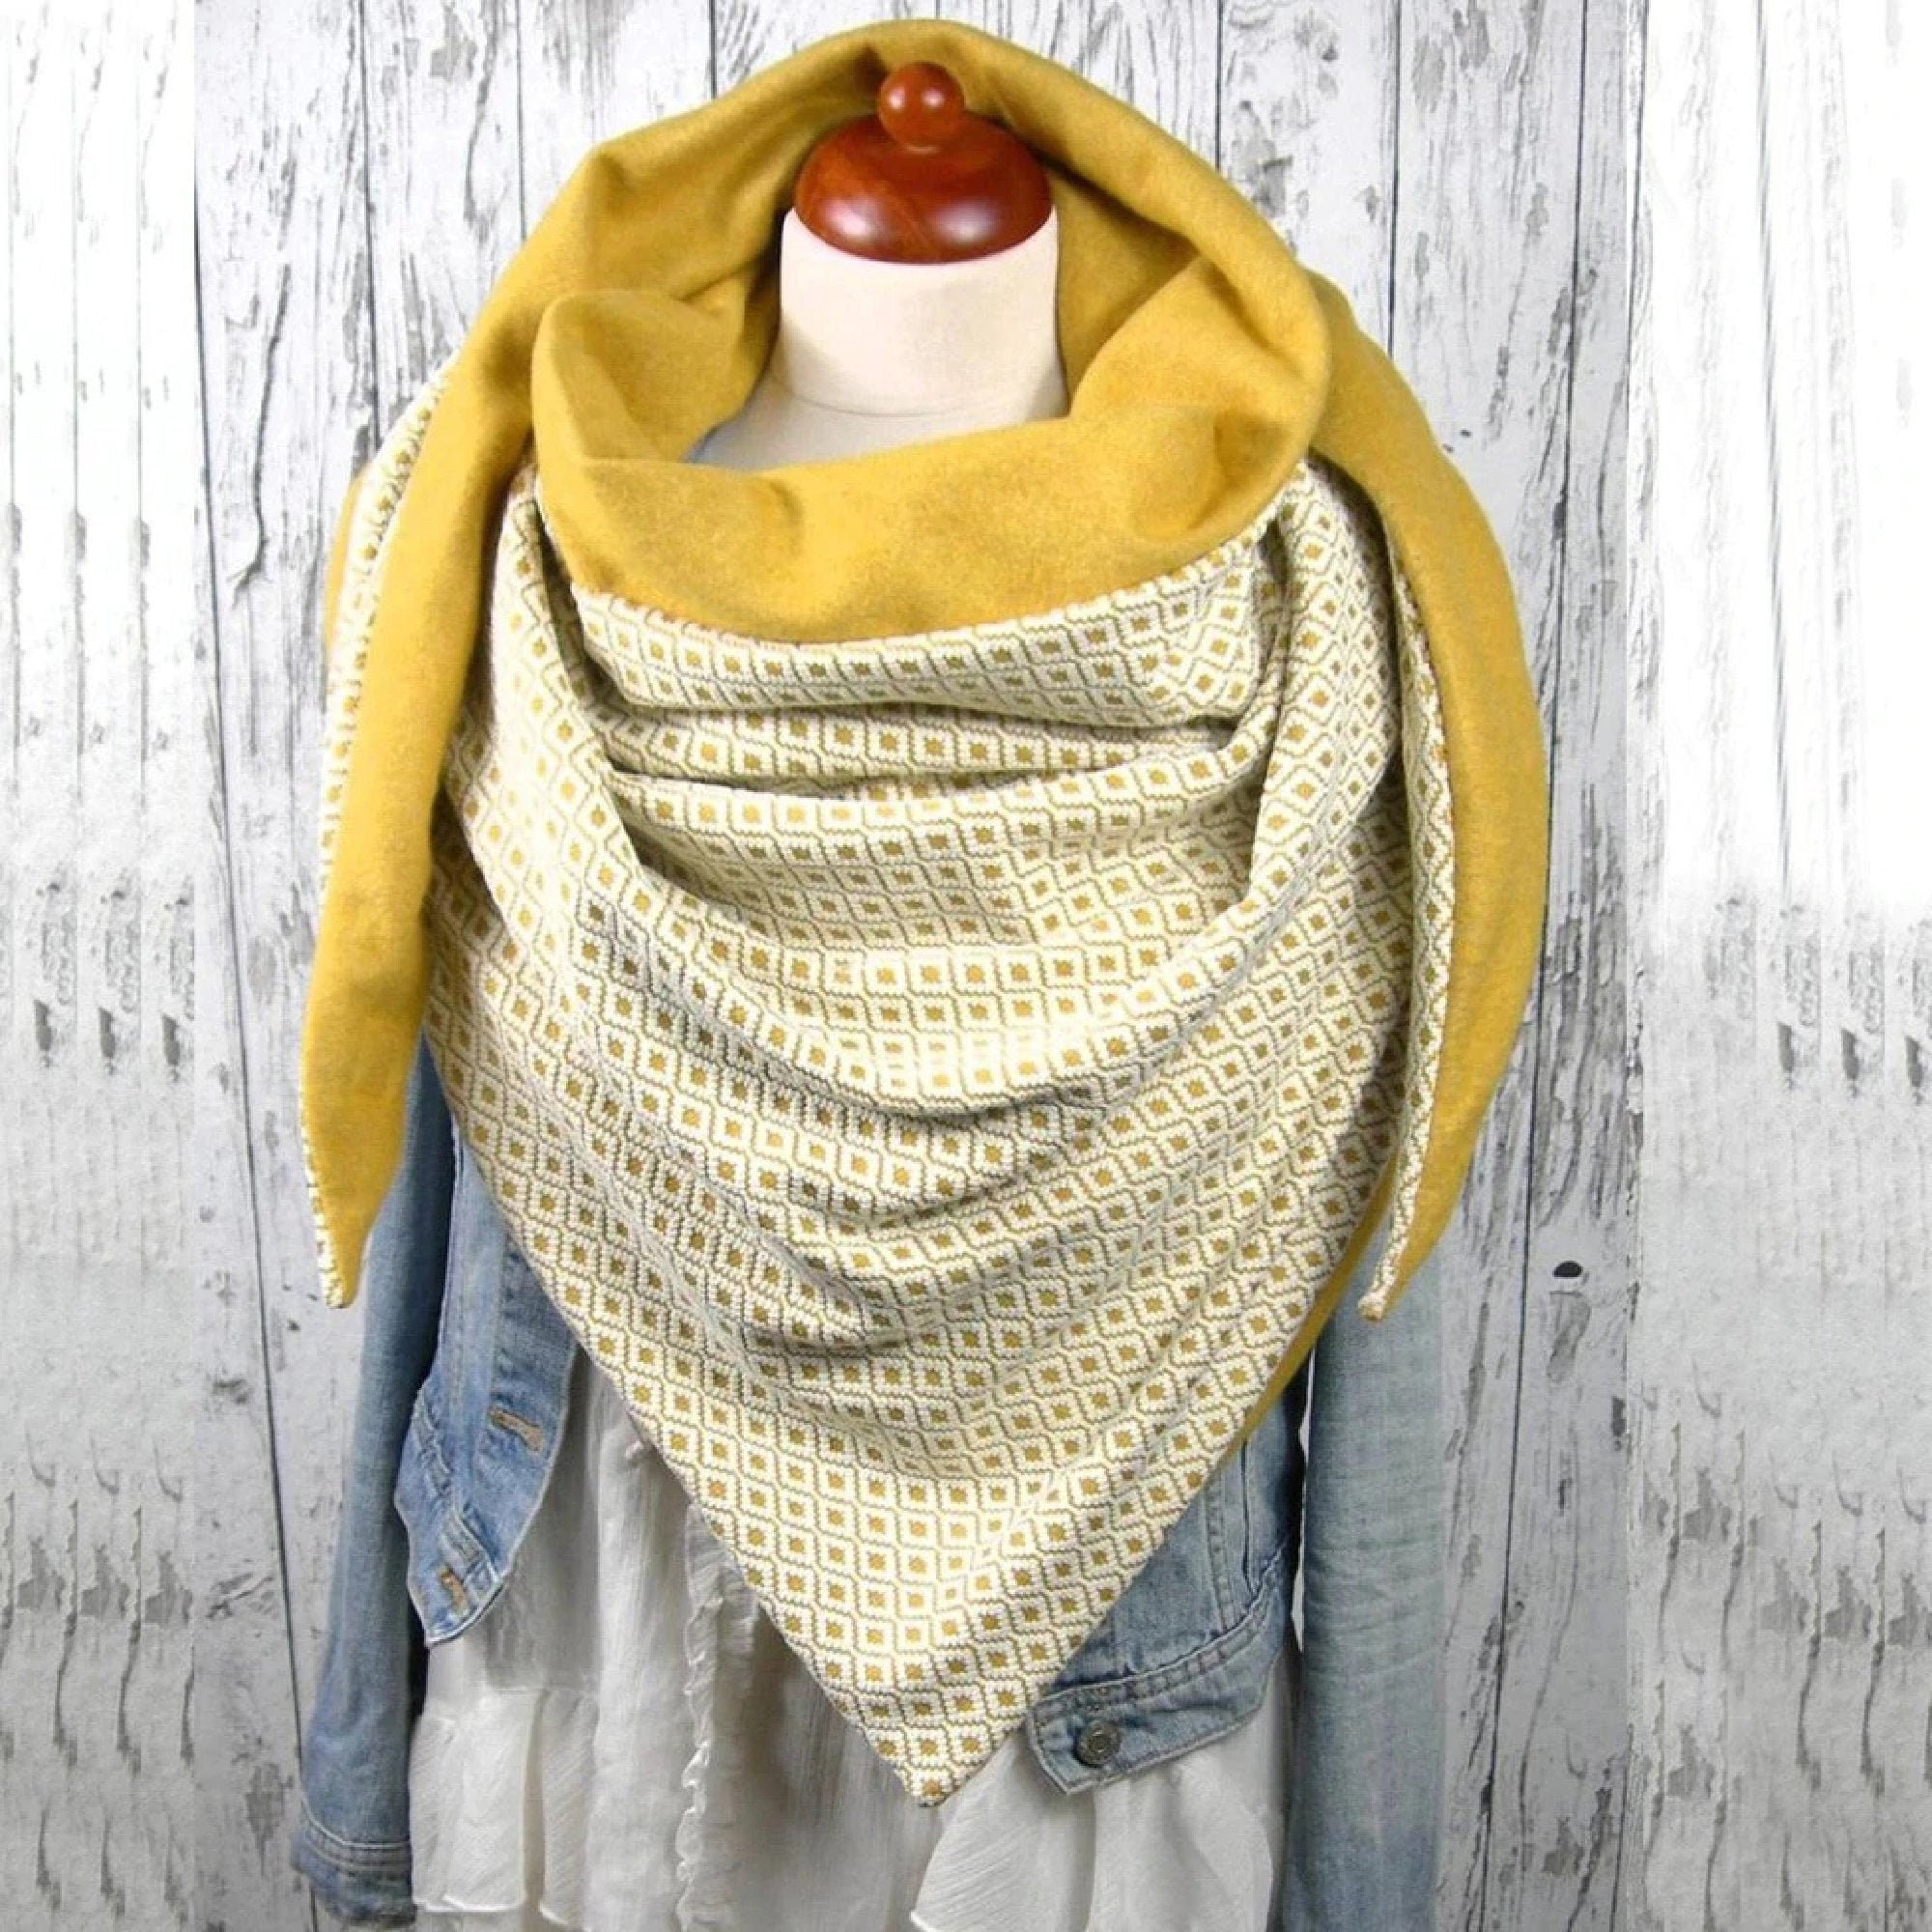 Wrap Scarf With Button, Triangular Blend Scarves, Button Scarf, Cotton Brown Gift For Her